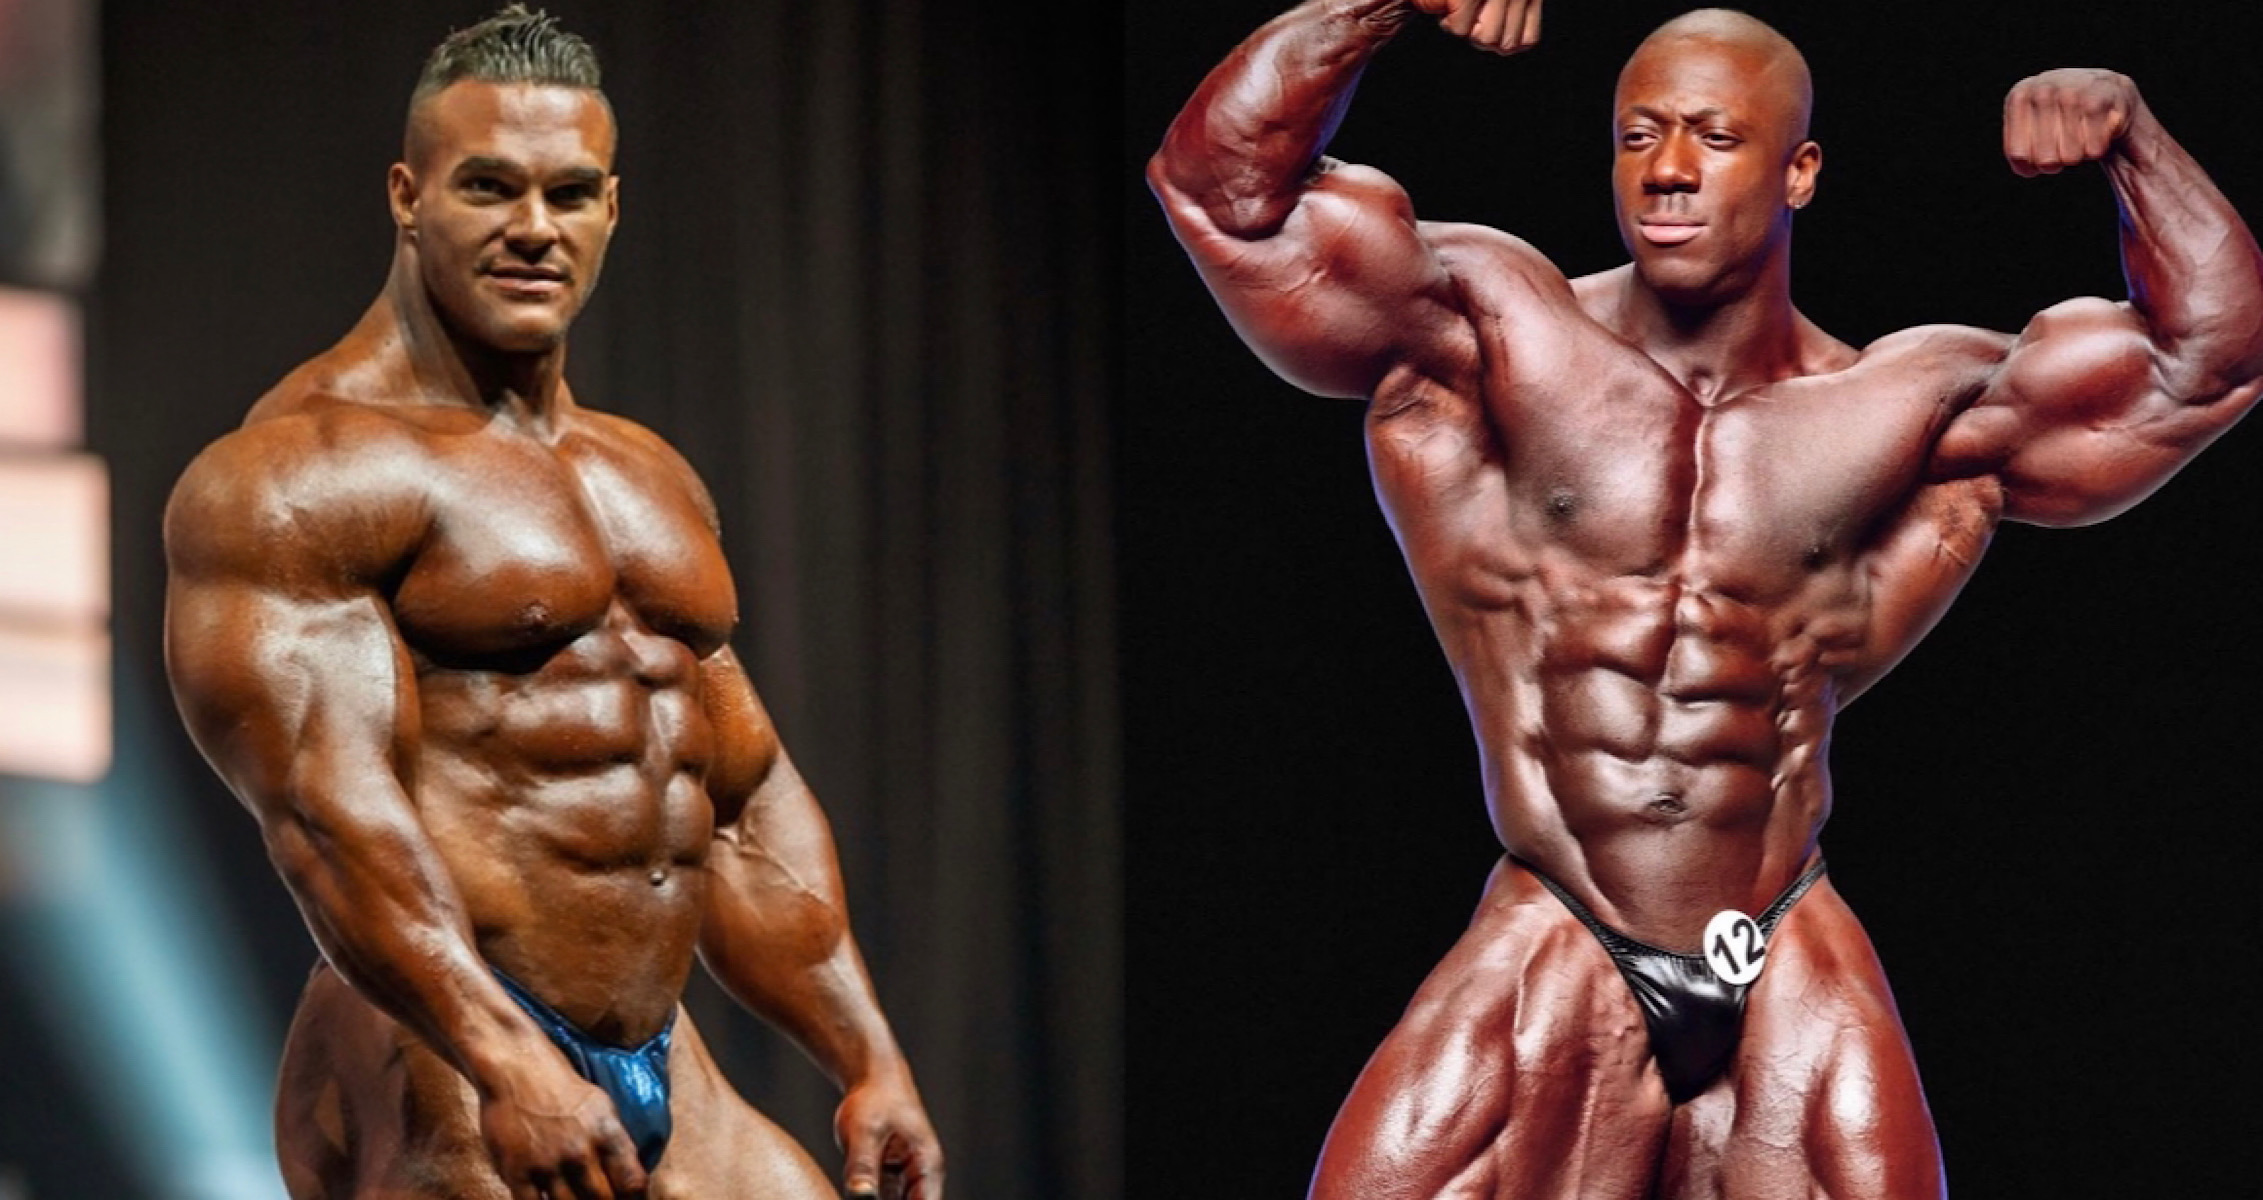 Nick Walker Pays Tribute to the Late Shawn Rhoden